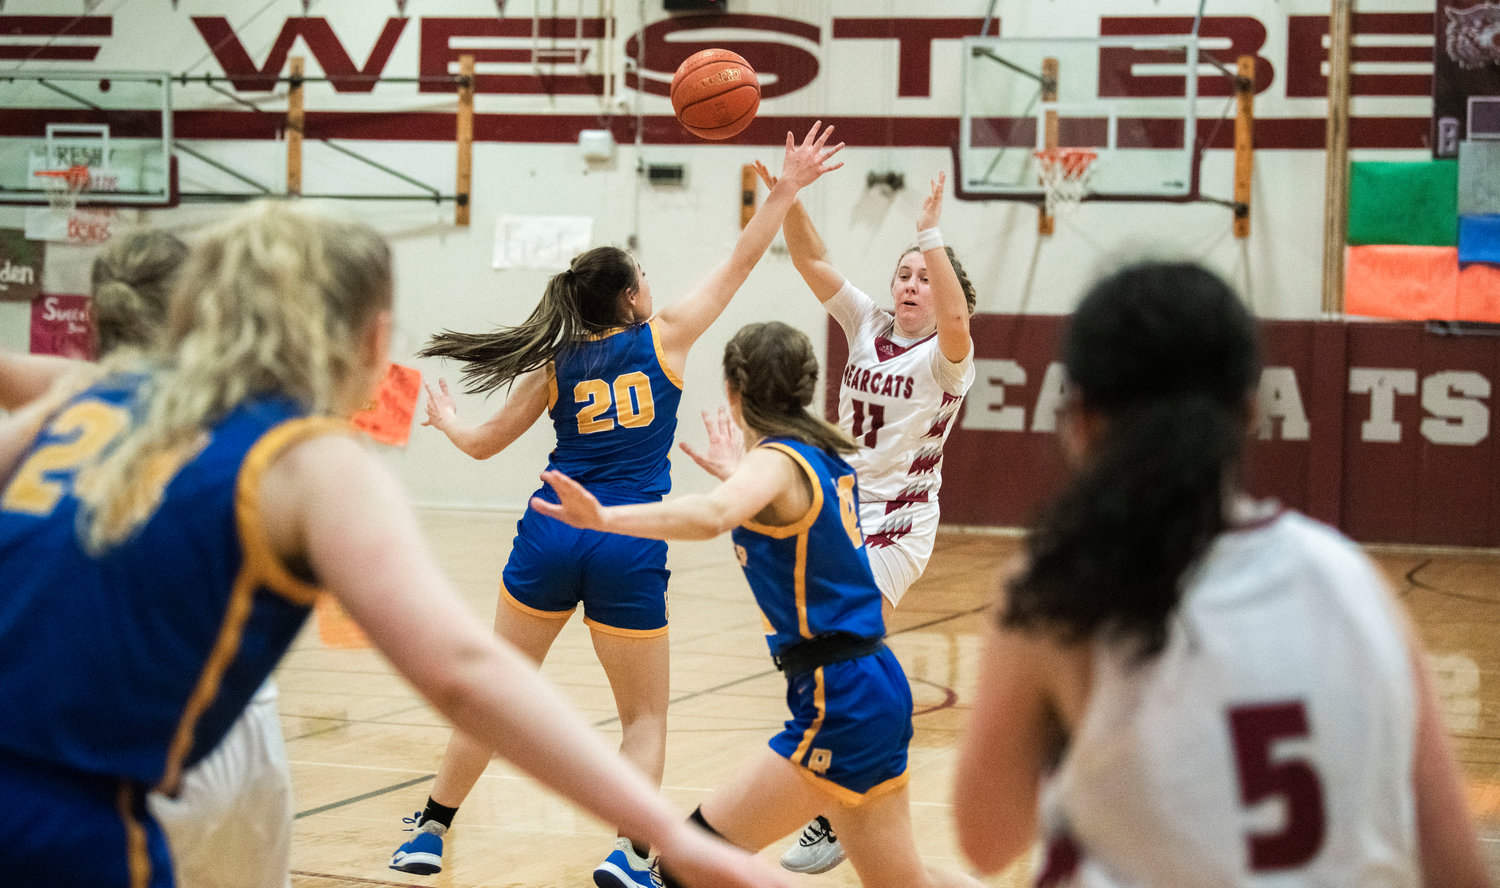 W.F. West’s Lena Fragner (11) looks to pass during a game against Rochester in Chehalis Thursday night.